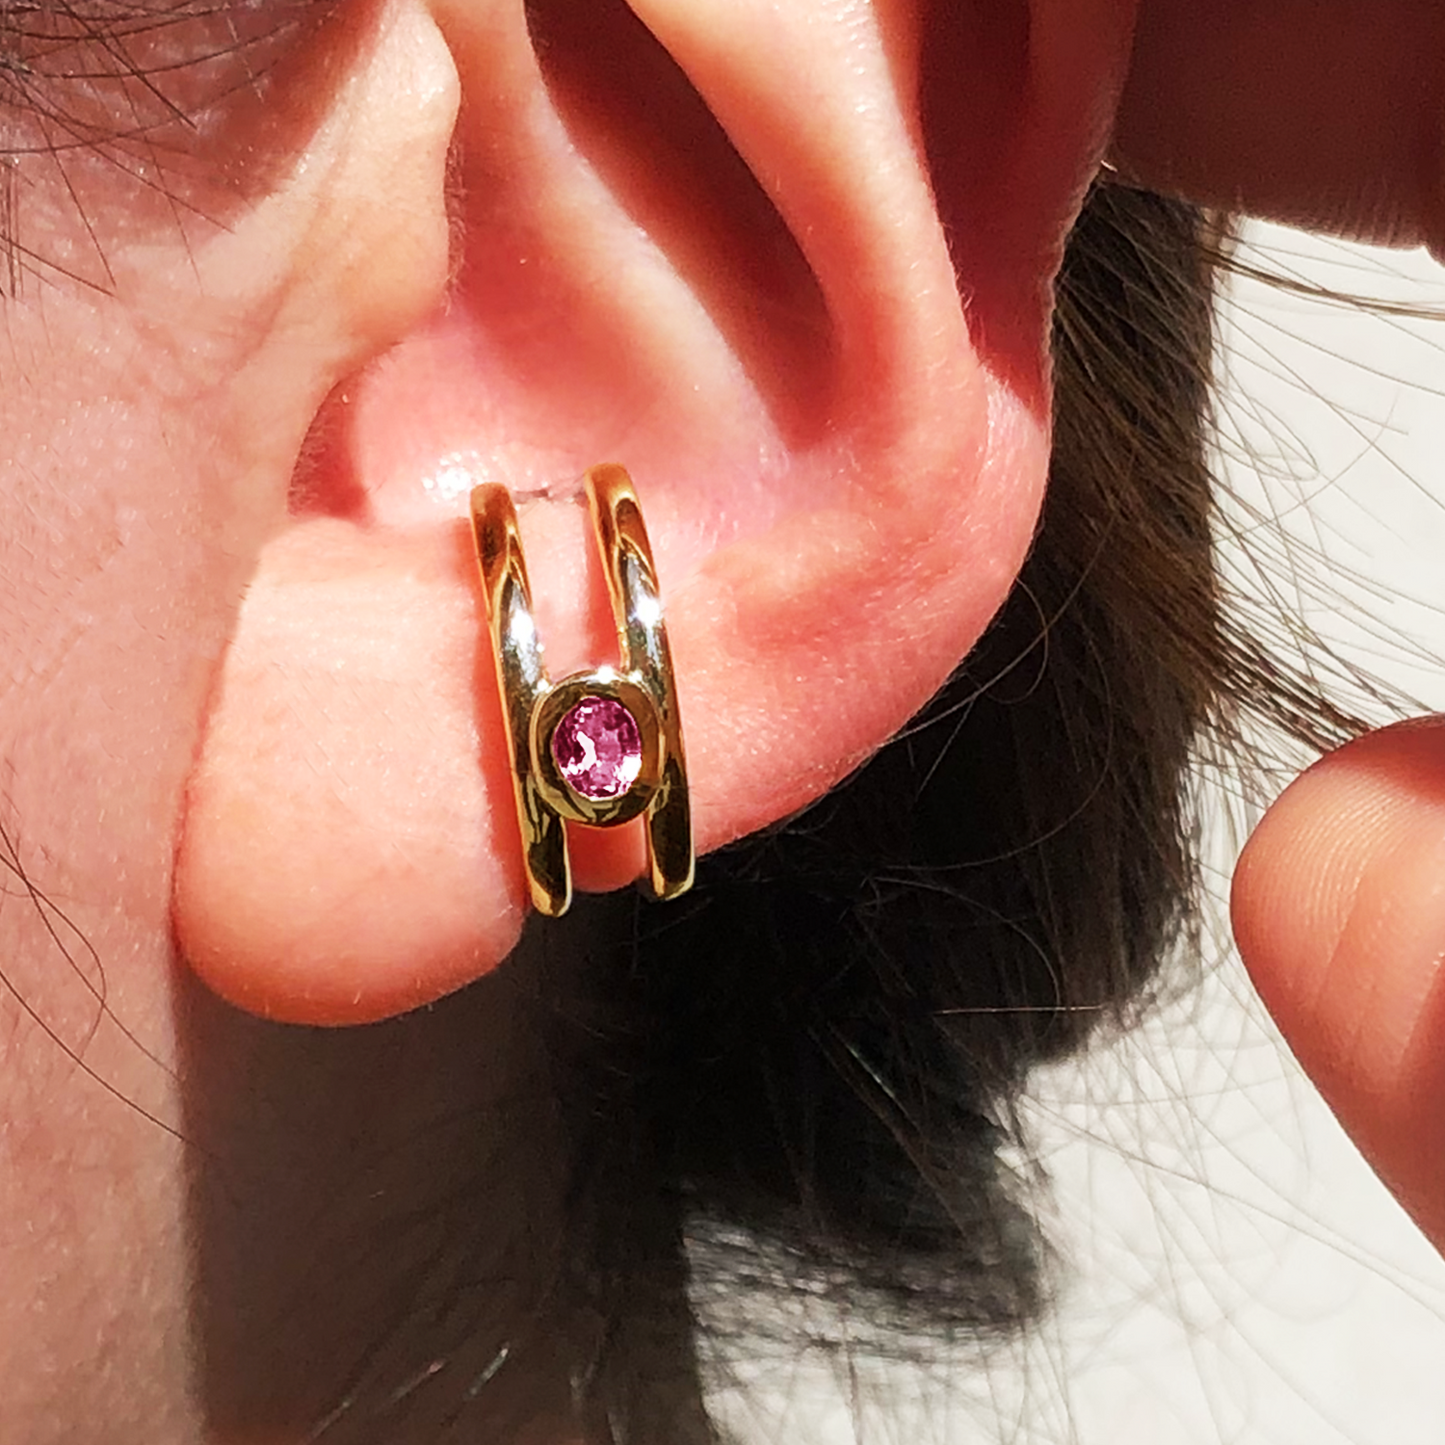 [Pink tourmaline] bind with oval gold #authentic